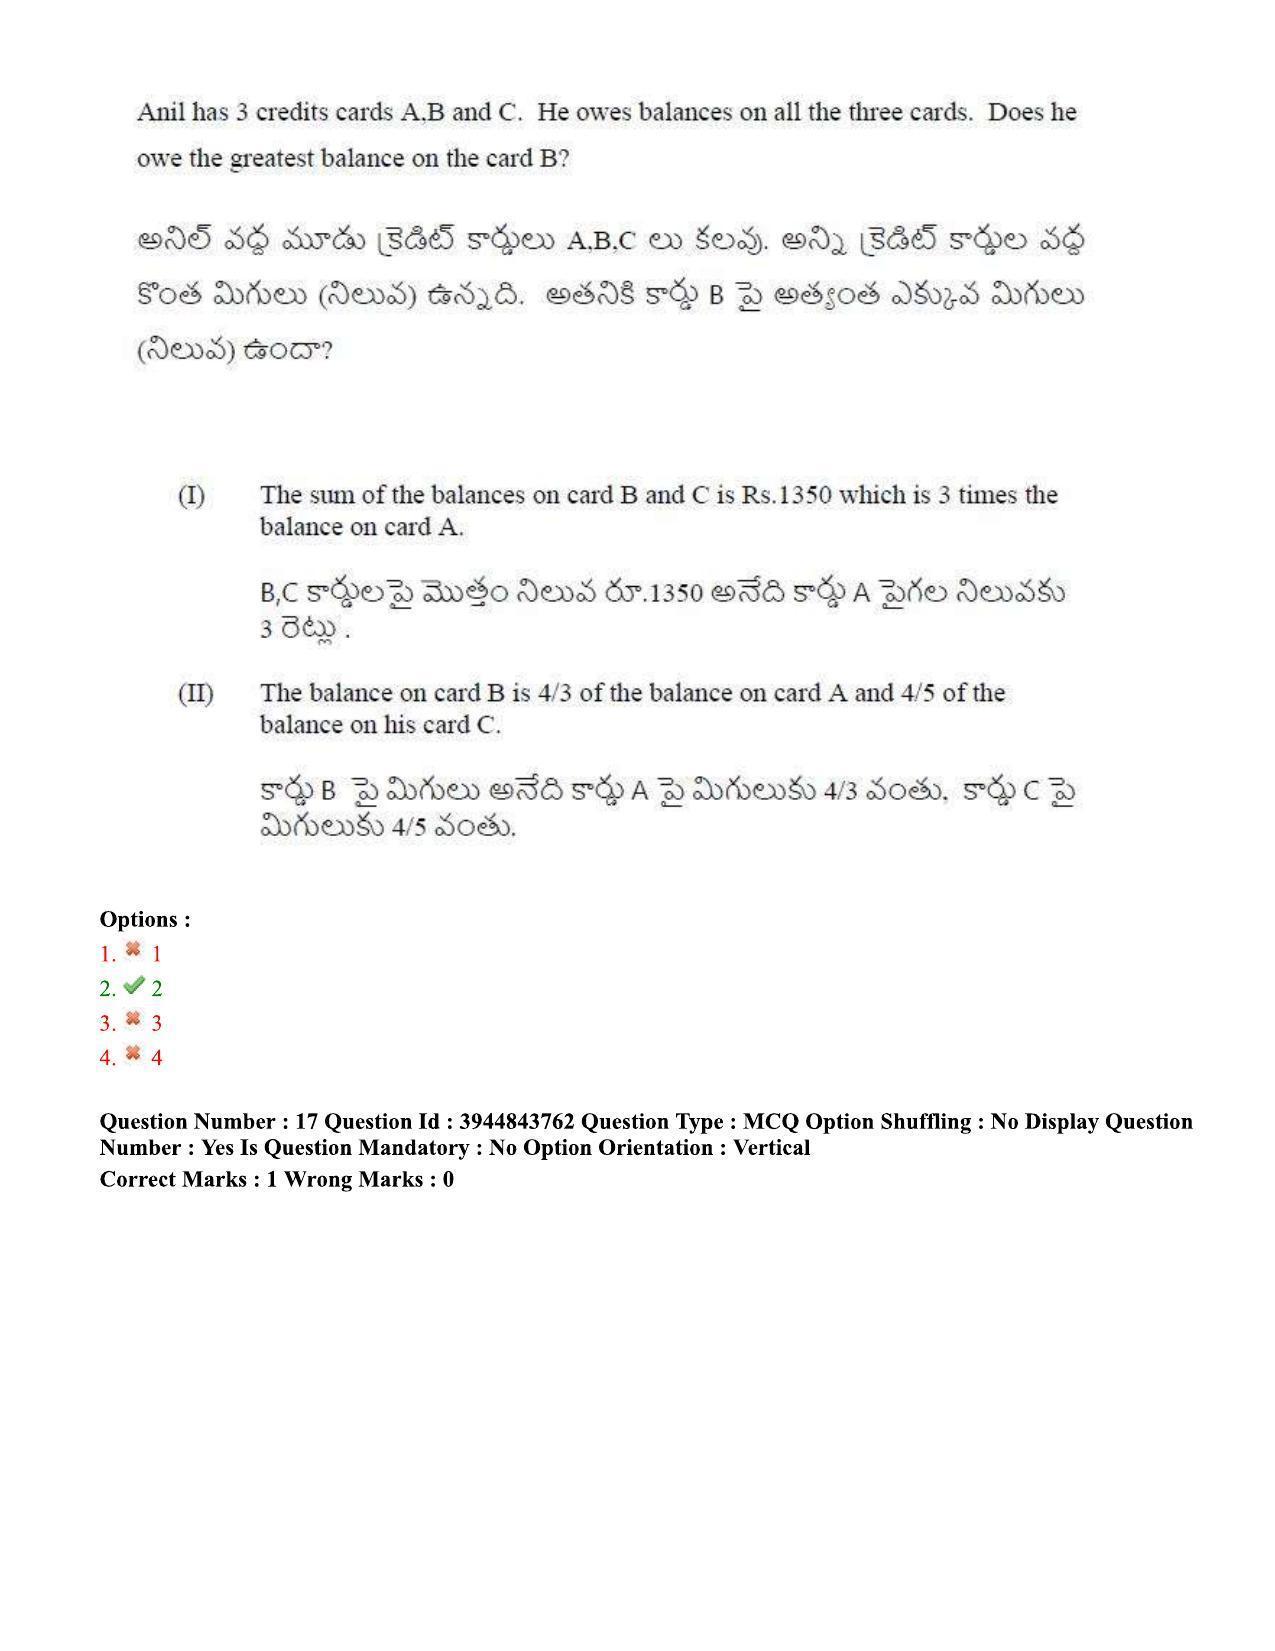 TS ICET 2020 Question Paper 1 - Oct 1, 2020	 - Page 13